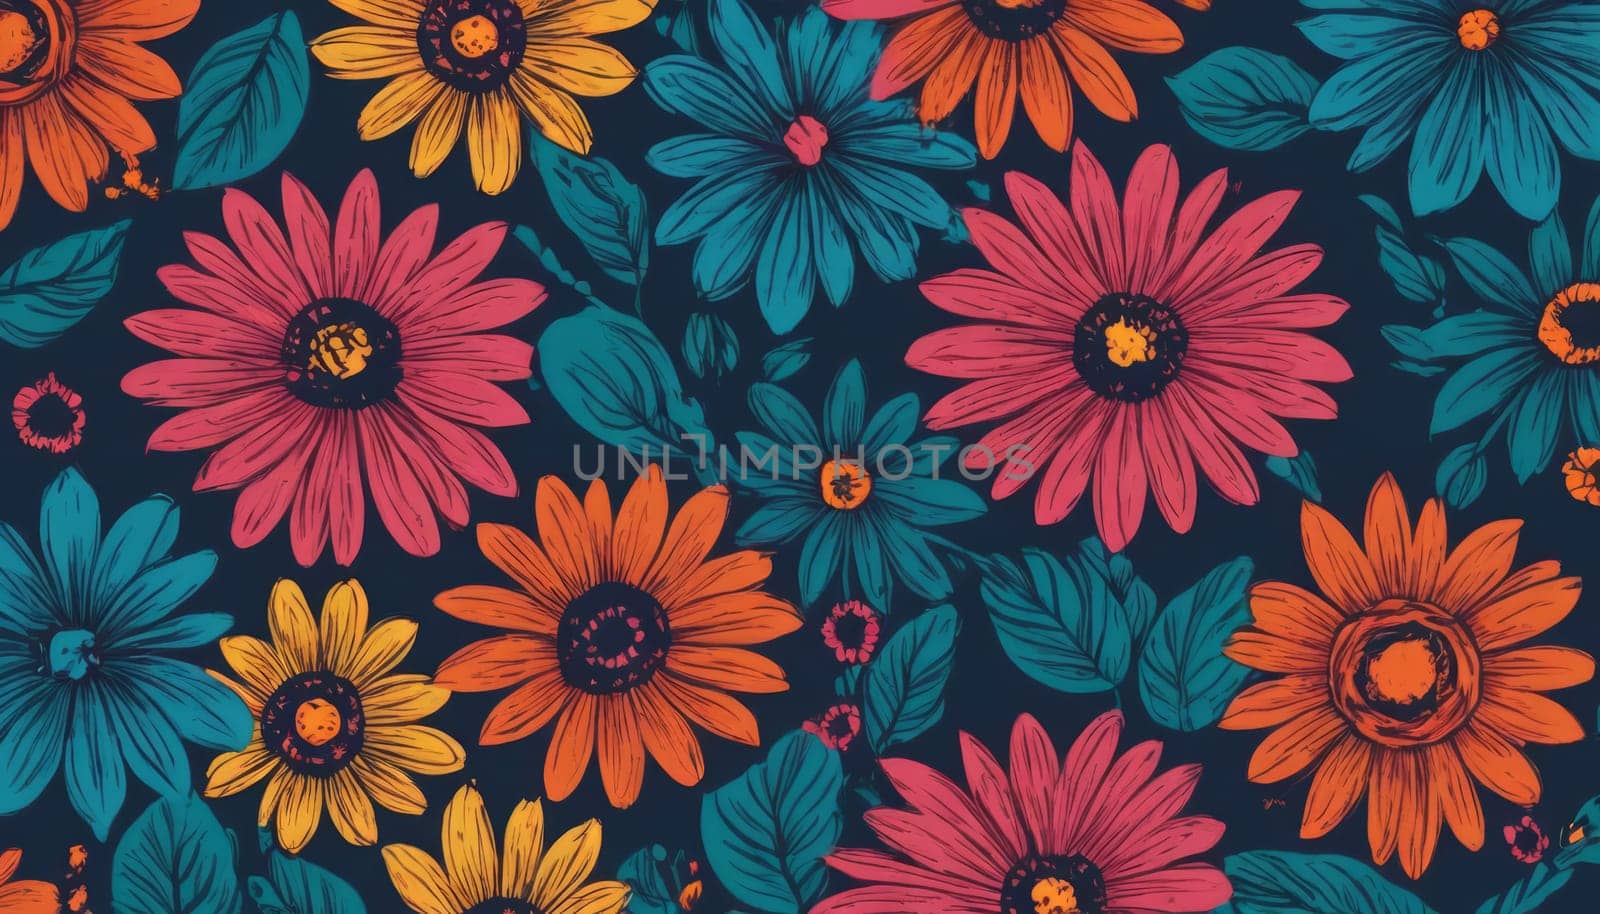 Multi-colored flowers and leaves. botanical wallpaper.